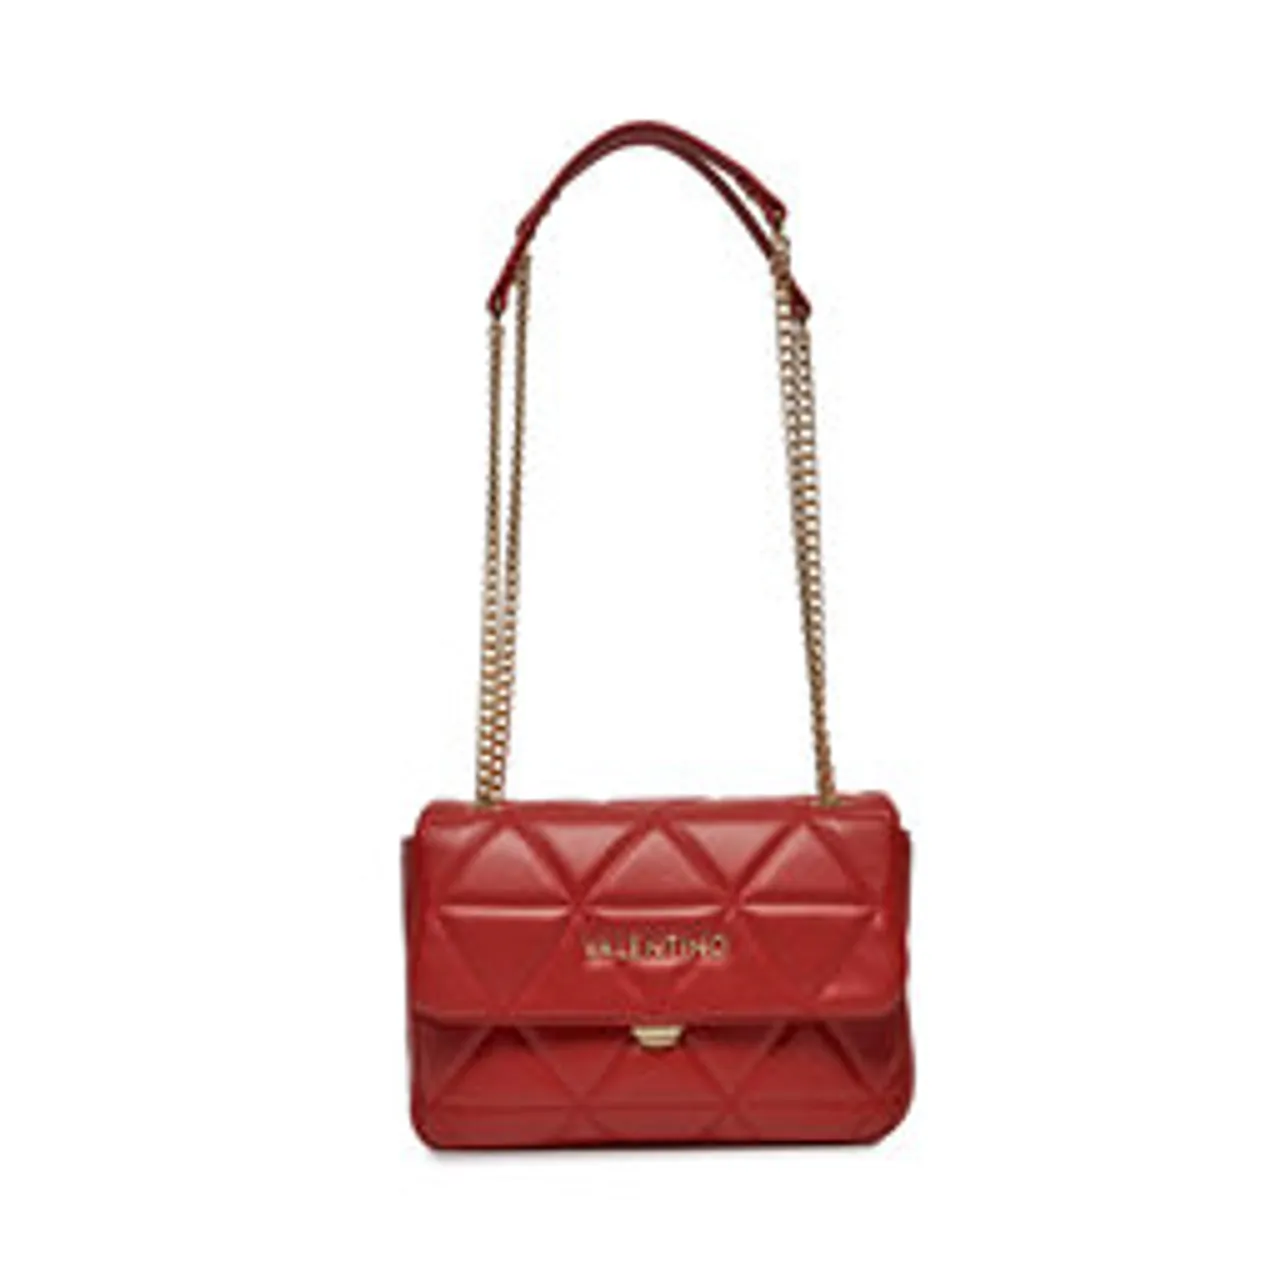 Handtasche Valentino Carnaby VBS7LO05 Rosso 003